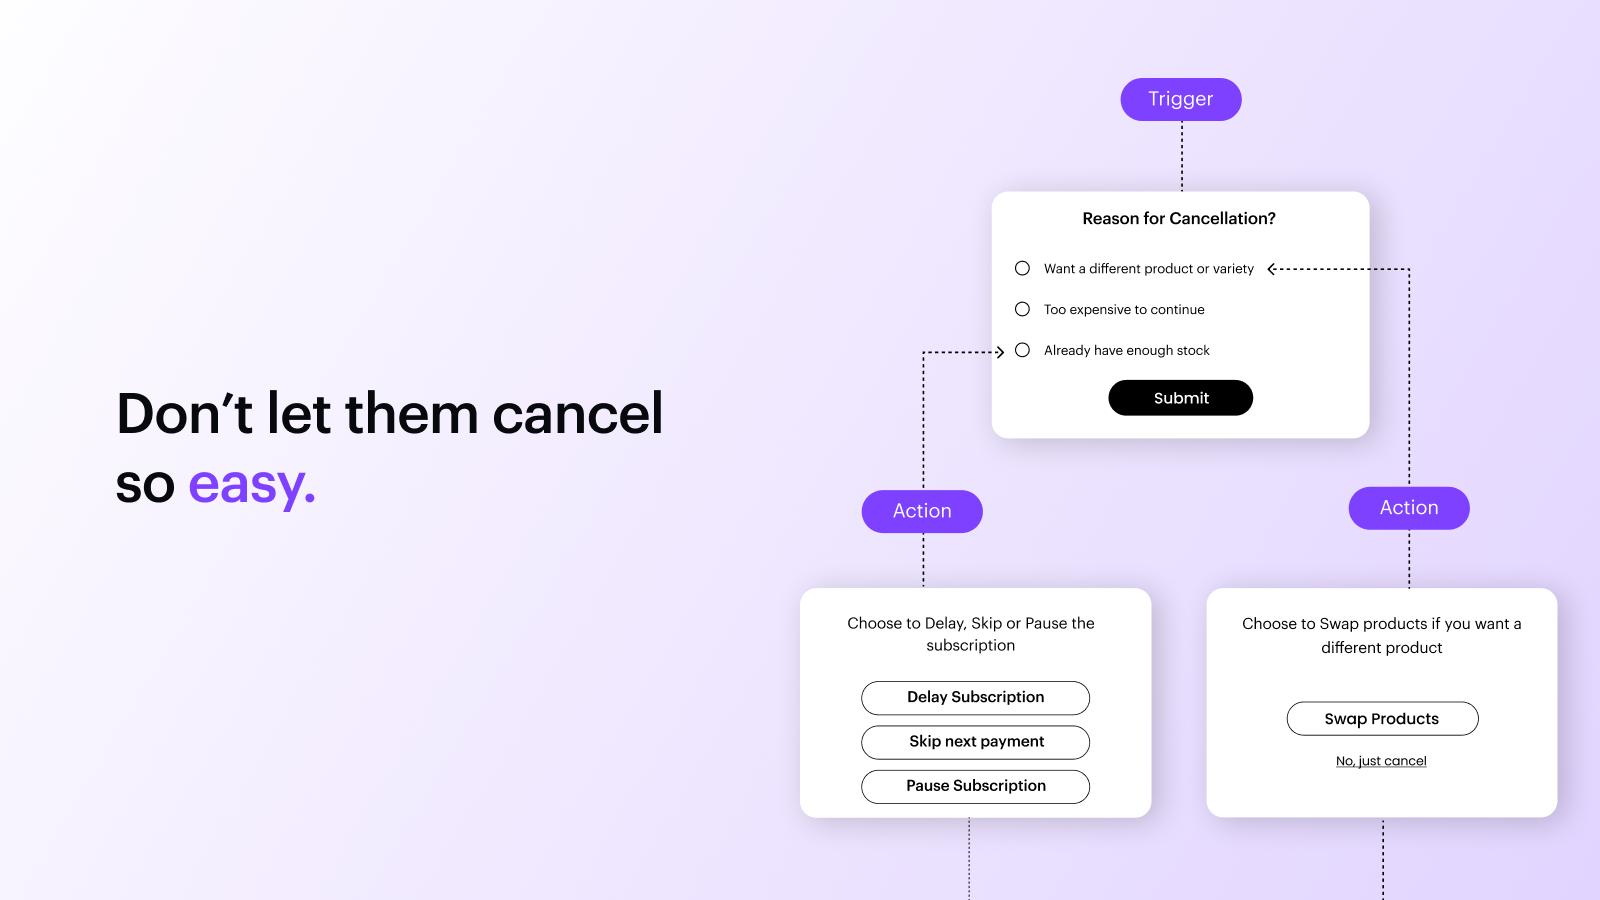 Don't let your subscribers cancel so easily with cancellation flows that hold them back.